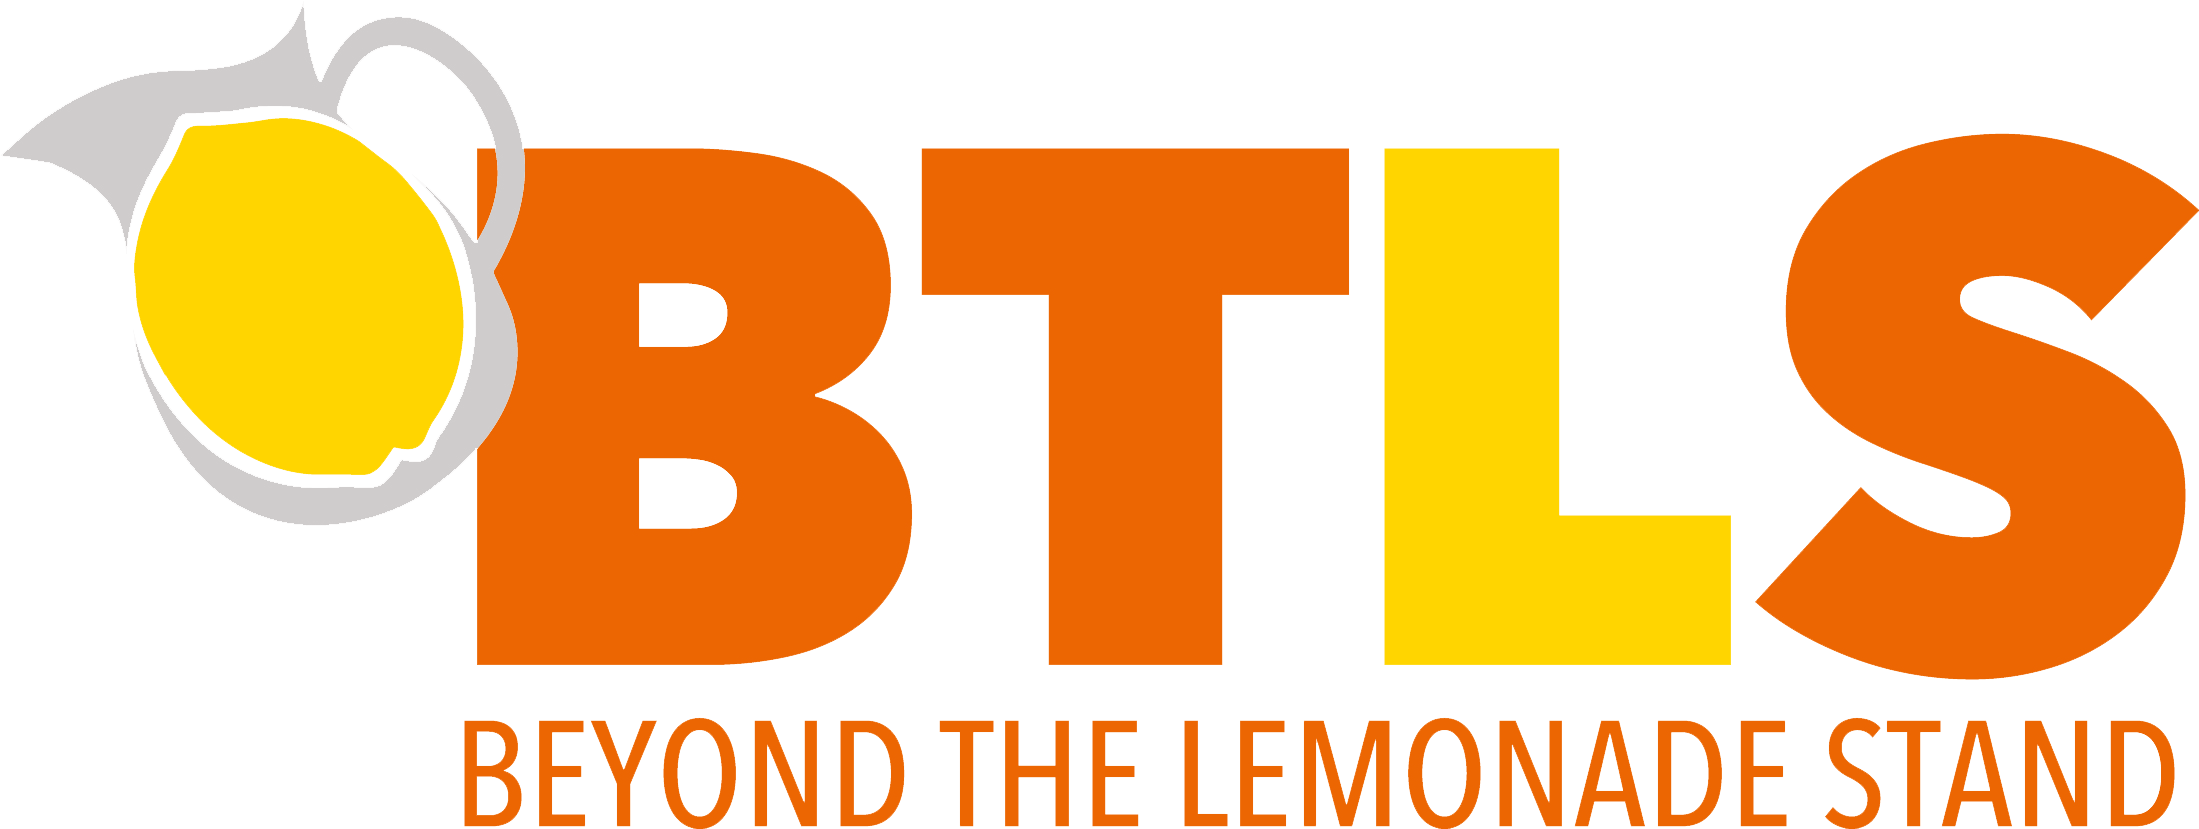 Welcome To - Beyond The Lemonade Stand (2199x829)